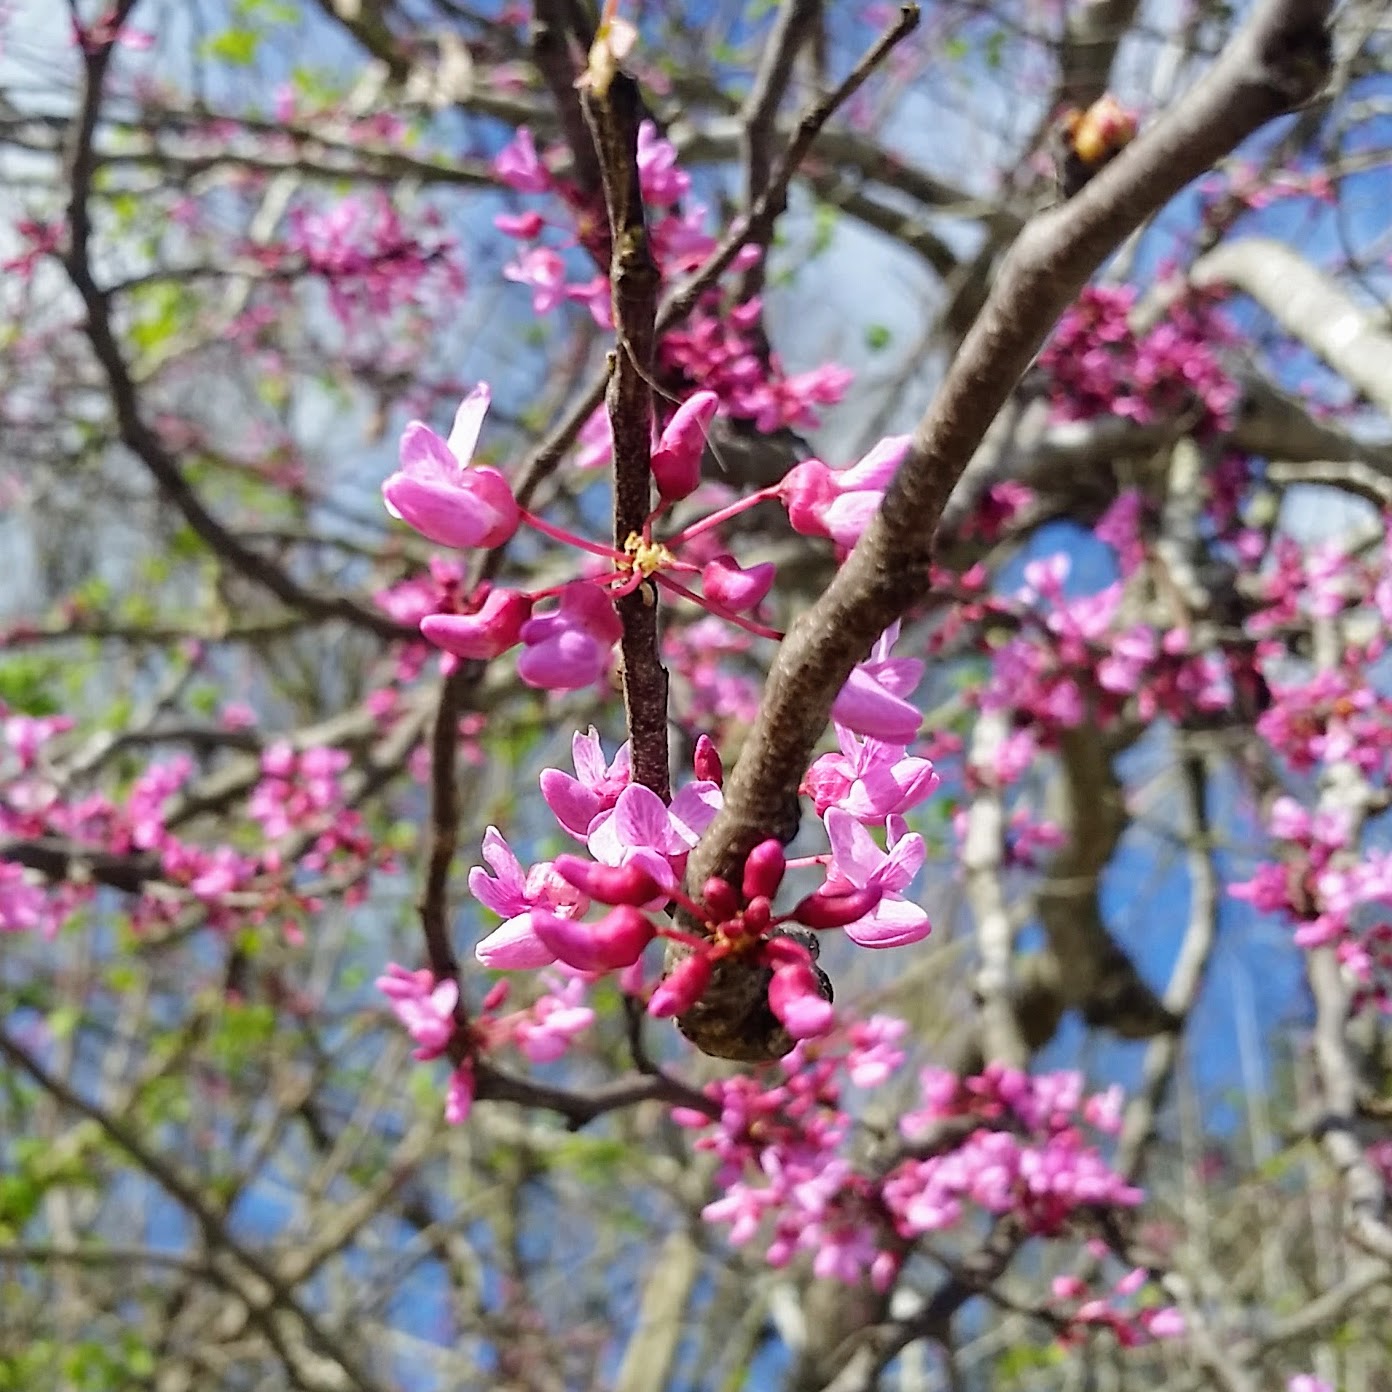 BZ Honey - The redbud blossom is a sure sign of Spring in Texas.